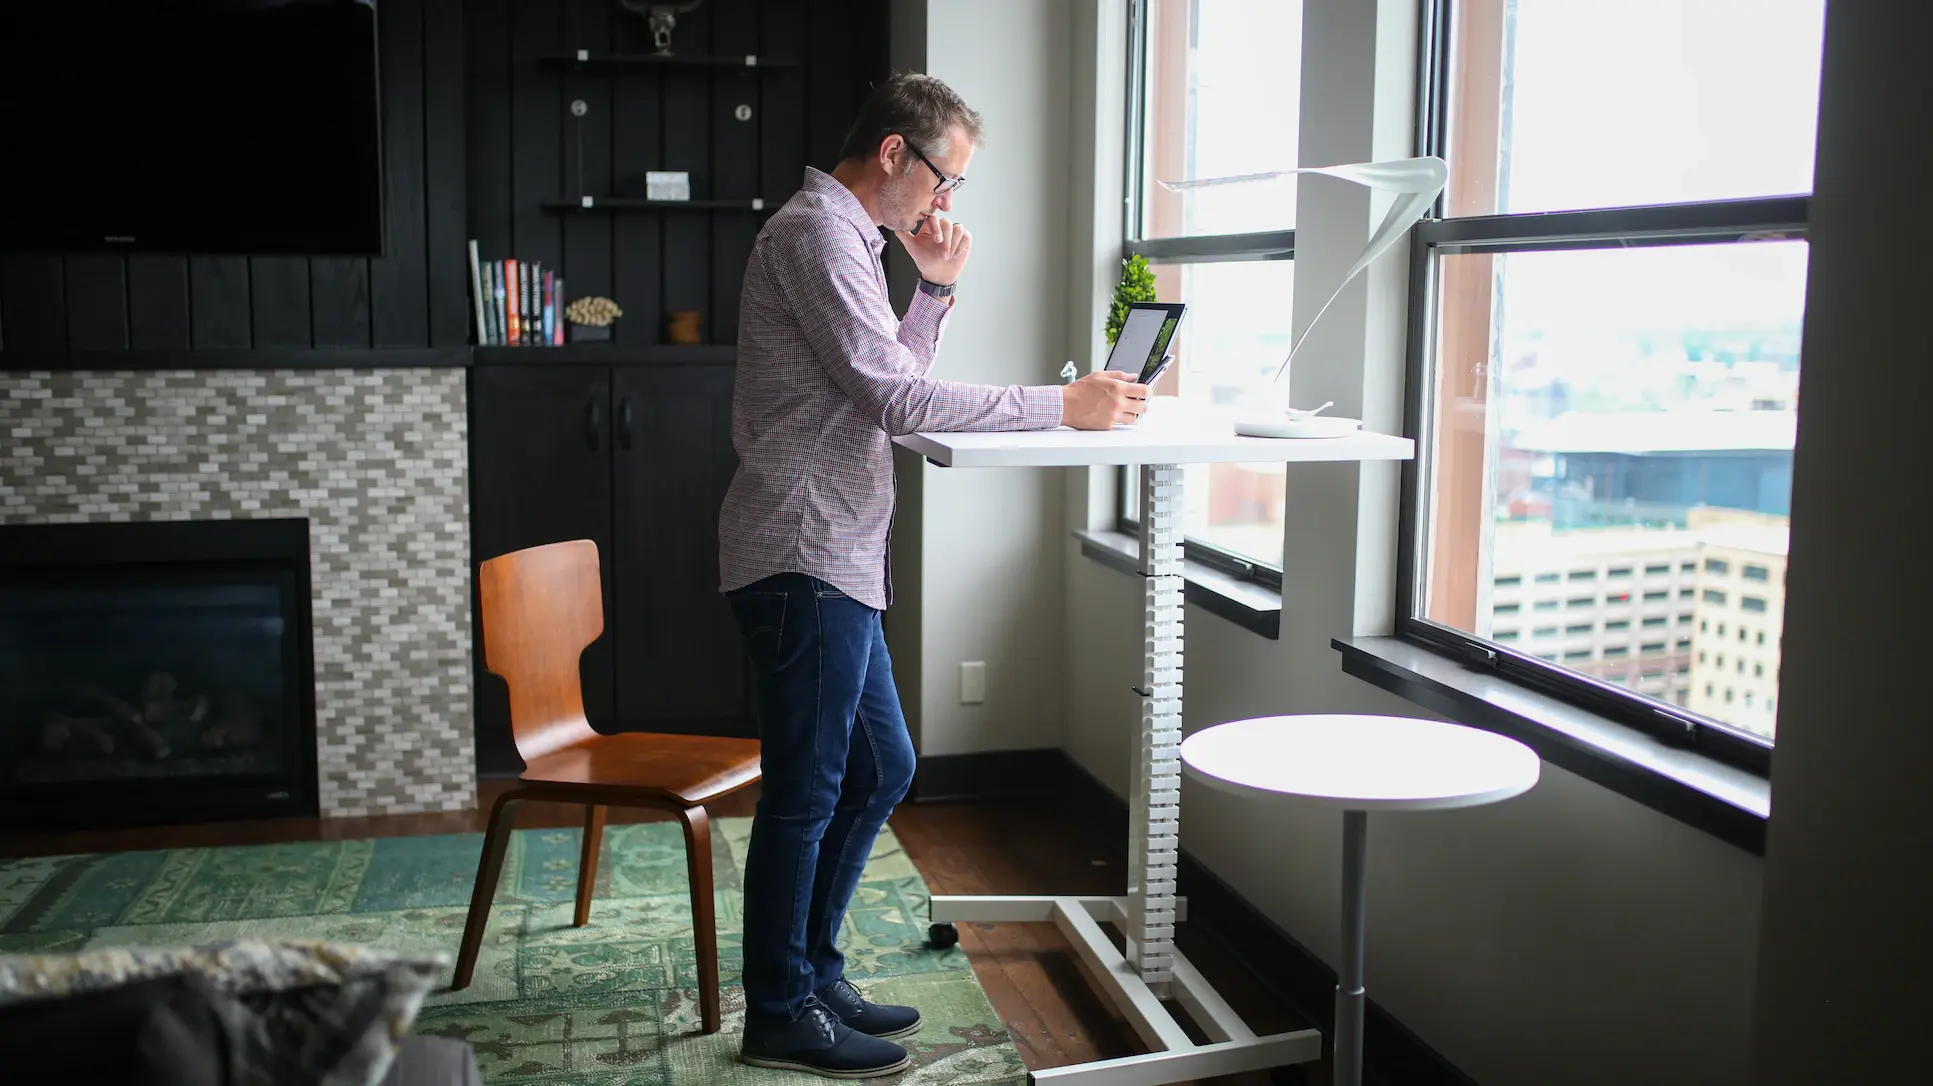 A standing desk promotes the right body posture for working remotely